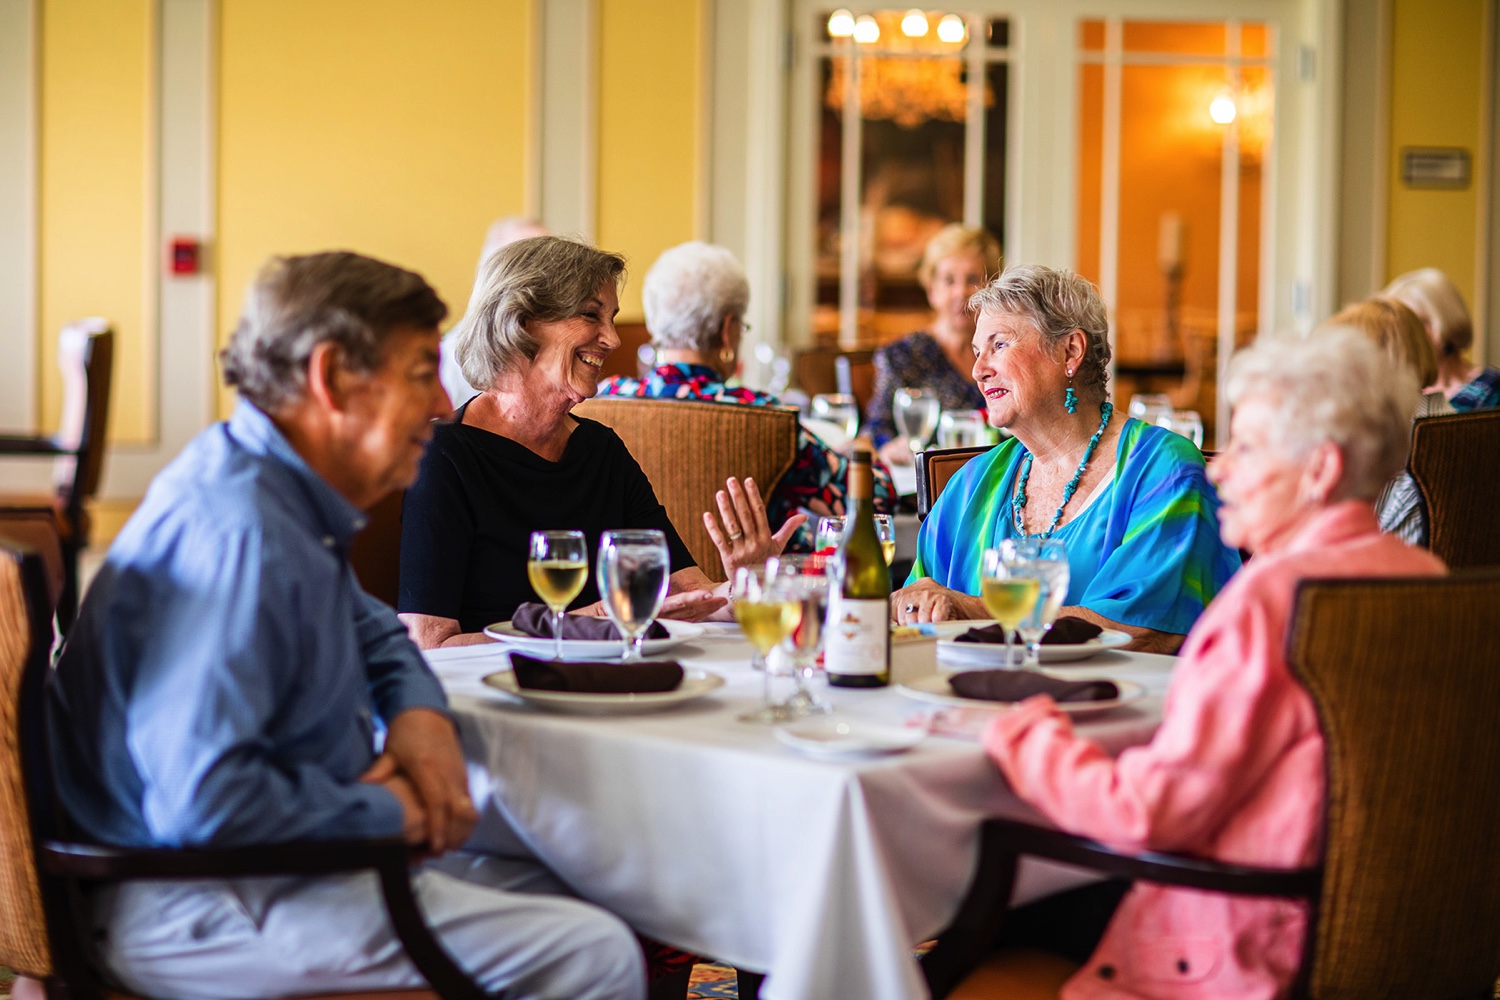 Four senior friends dining together in the community dining room